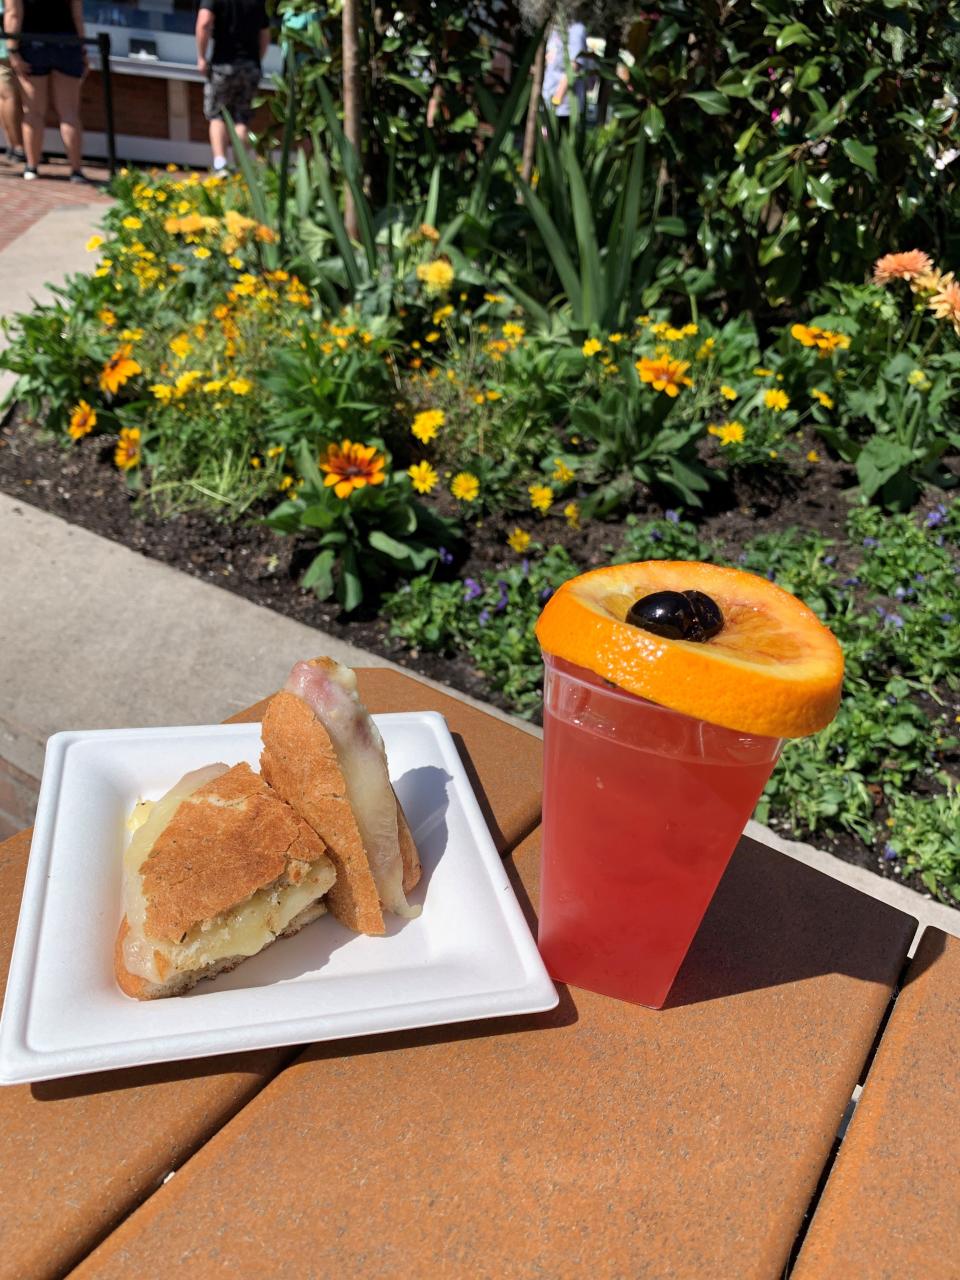 A Muffuletta Panini and a Bayou Cocktail from the Magnolia Terrace kitchen were favorite finds at the Epcot International Flower & Garden Festival.